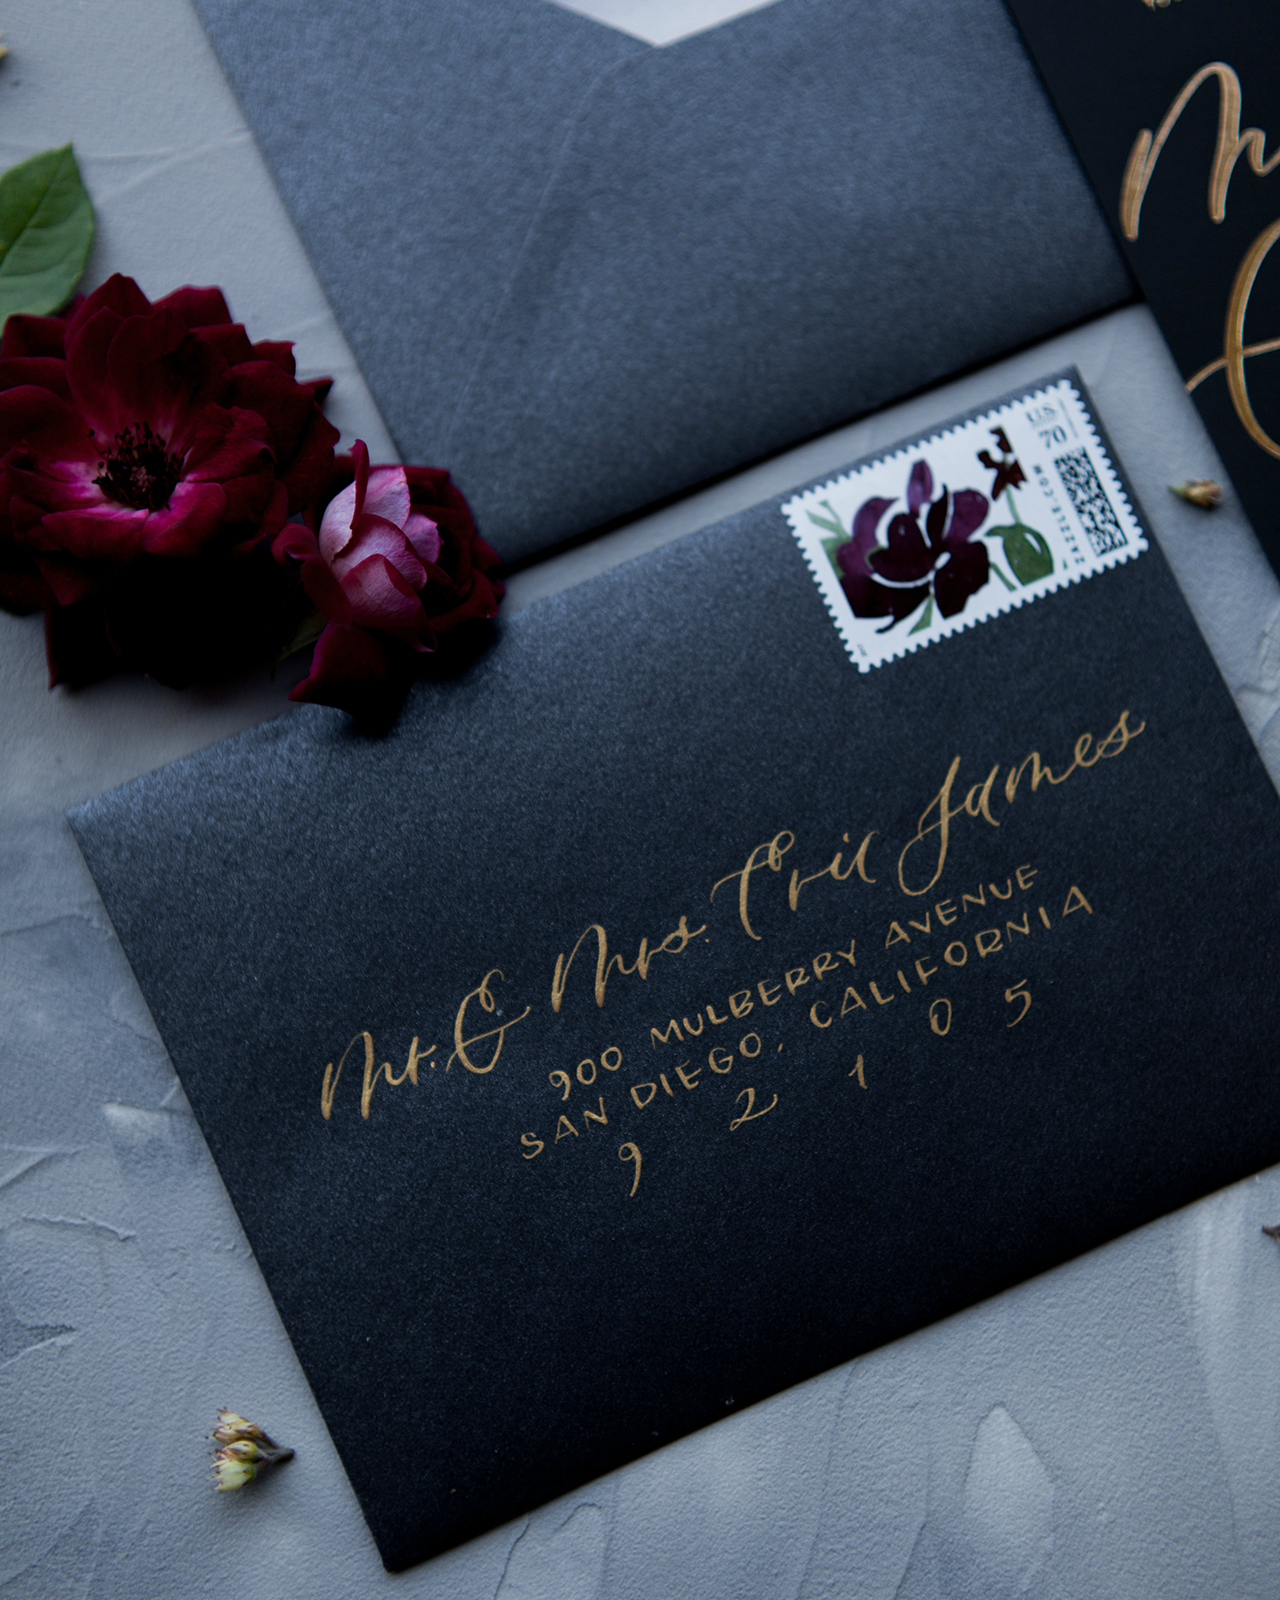 Glamorous Mixed Metals Wedding Invitations by Twinkle and Toast